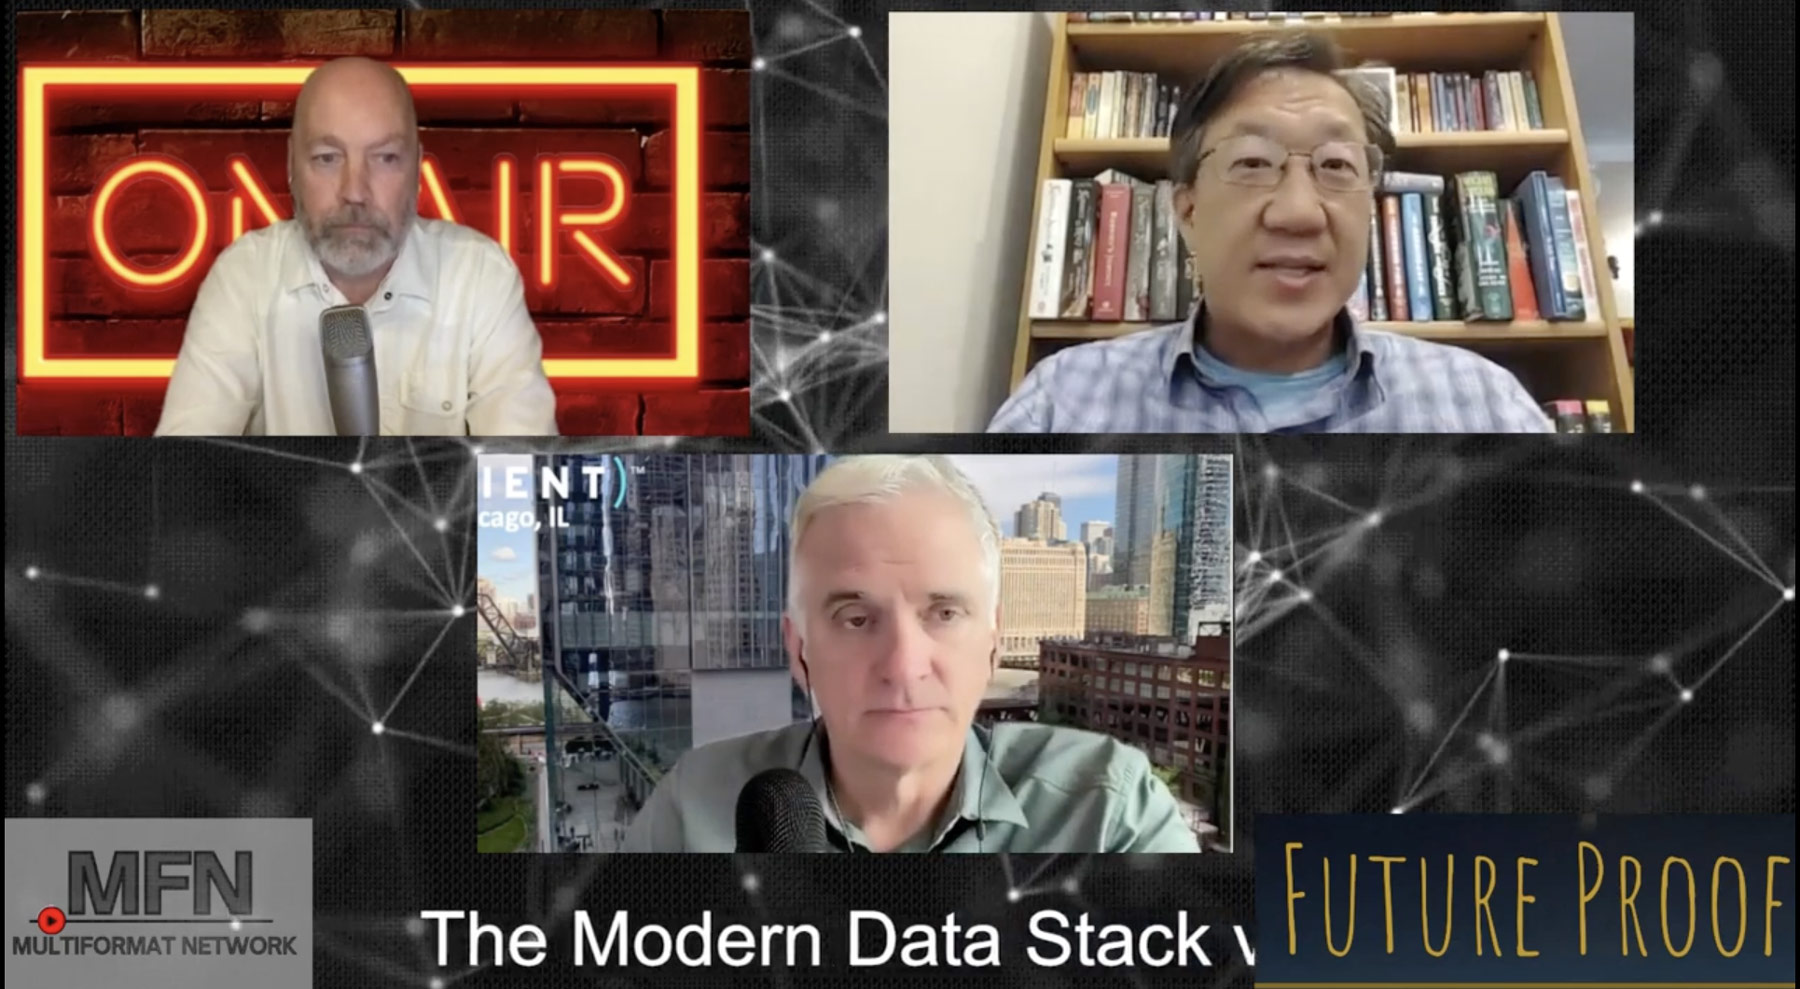 Ocient CEO Chris Gladwin Joins DM Radio to Discuss Hyperscale Data Warehousing